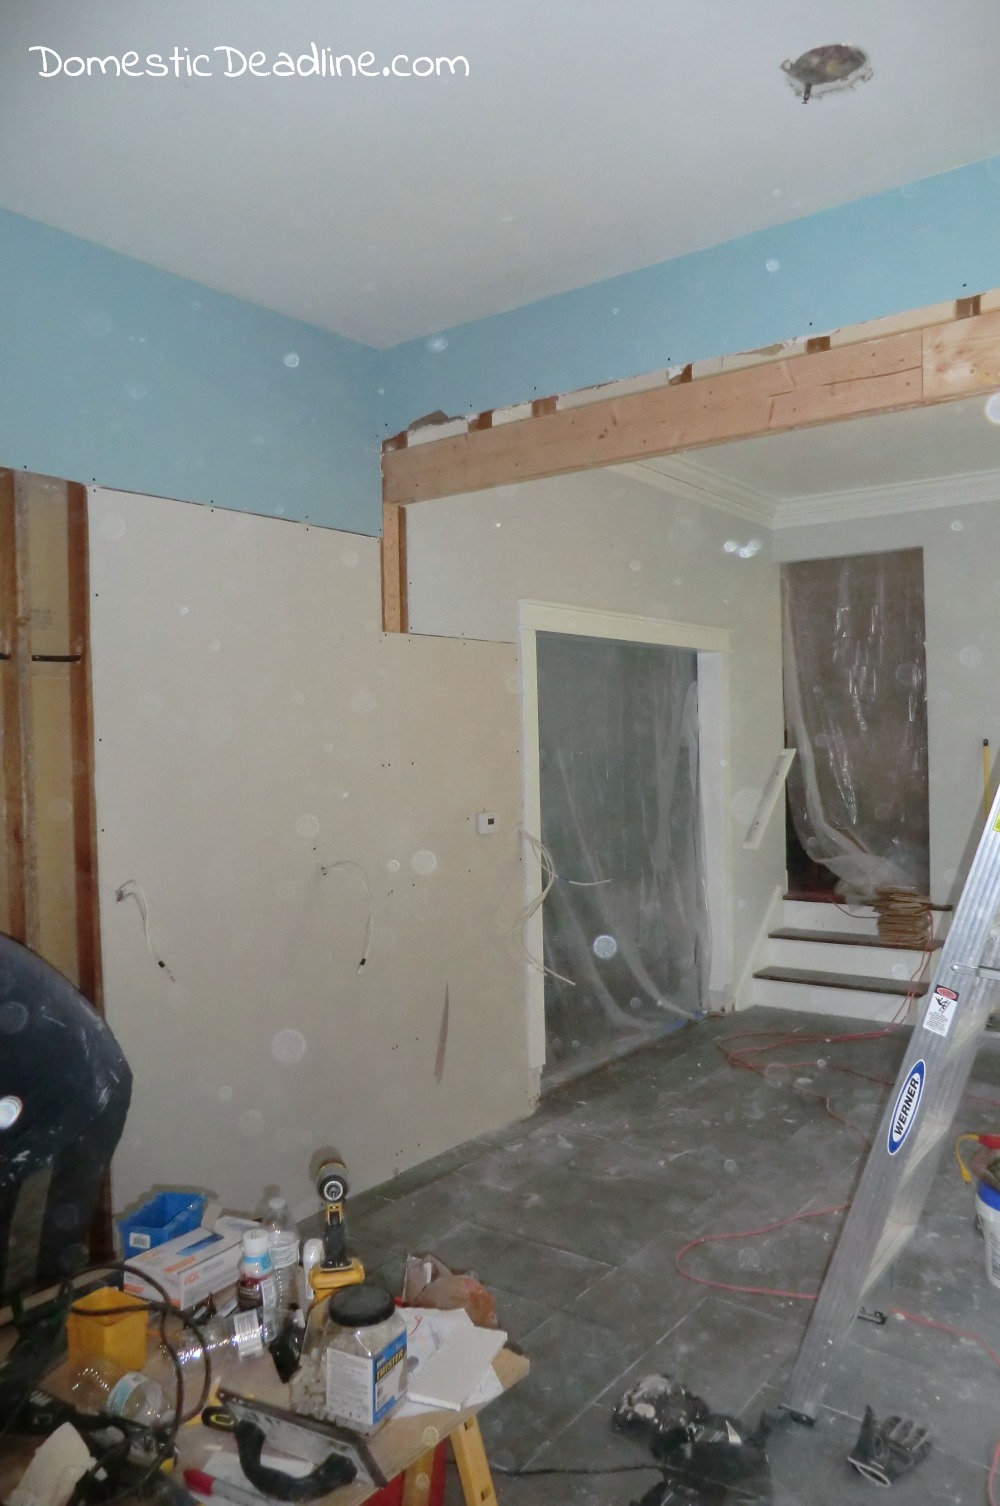 New Insulation, Drywall, Spackle, Kitchen Renovation Domestic Deadline